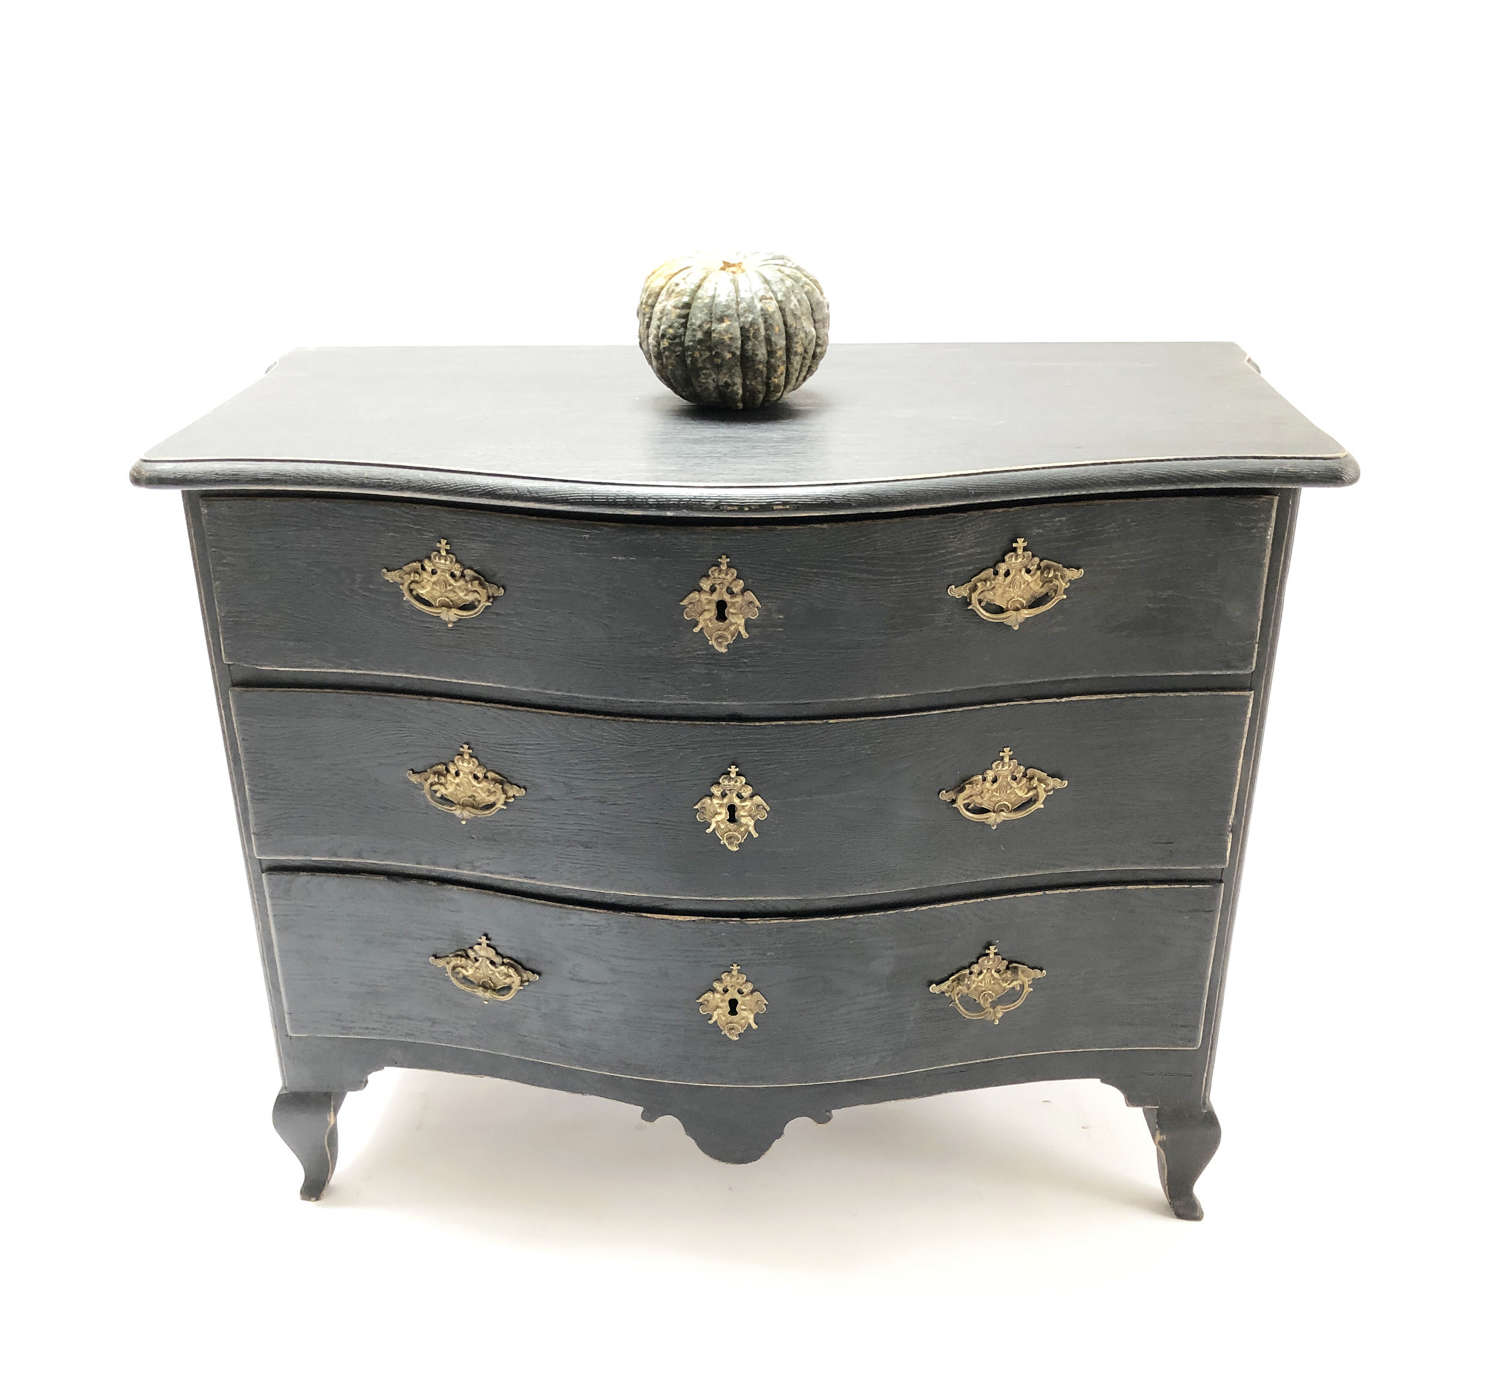 Early 19th c small  Black painted Commode - circa 1820